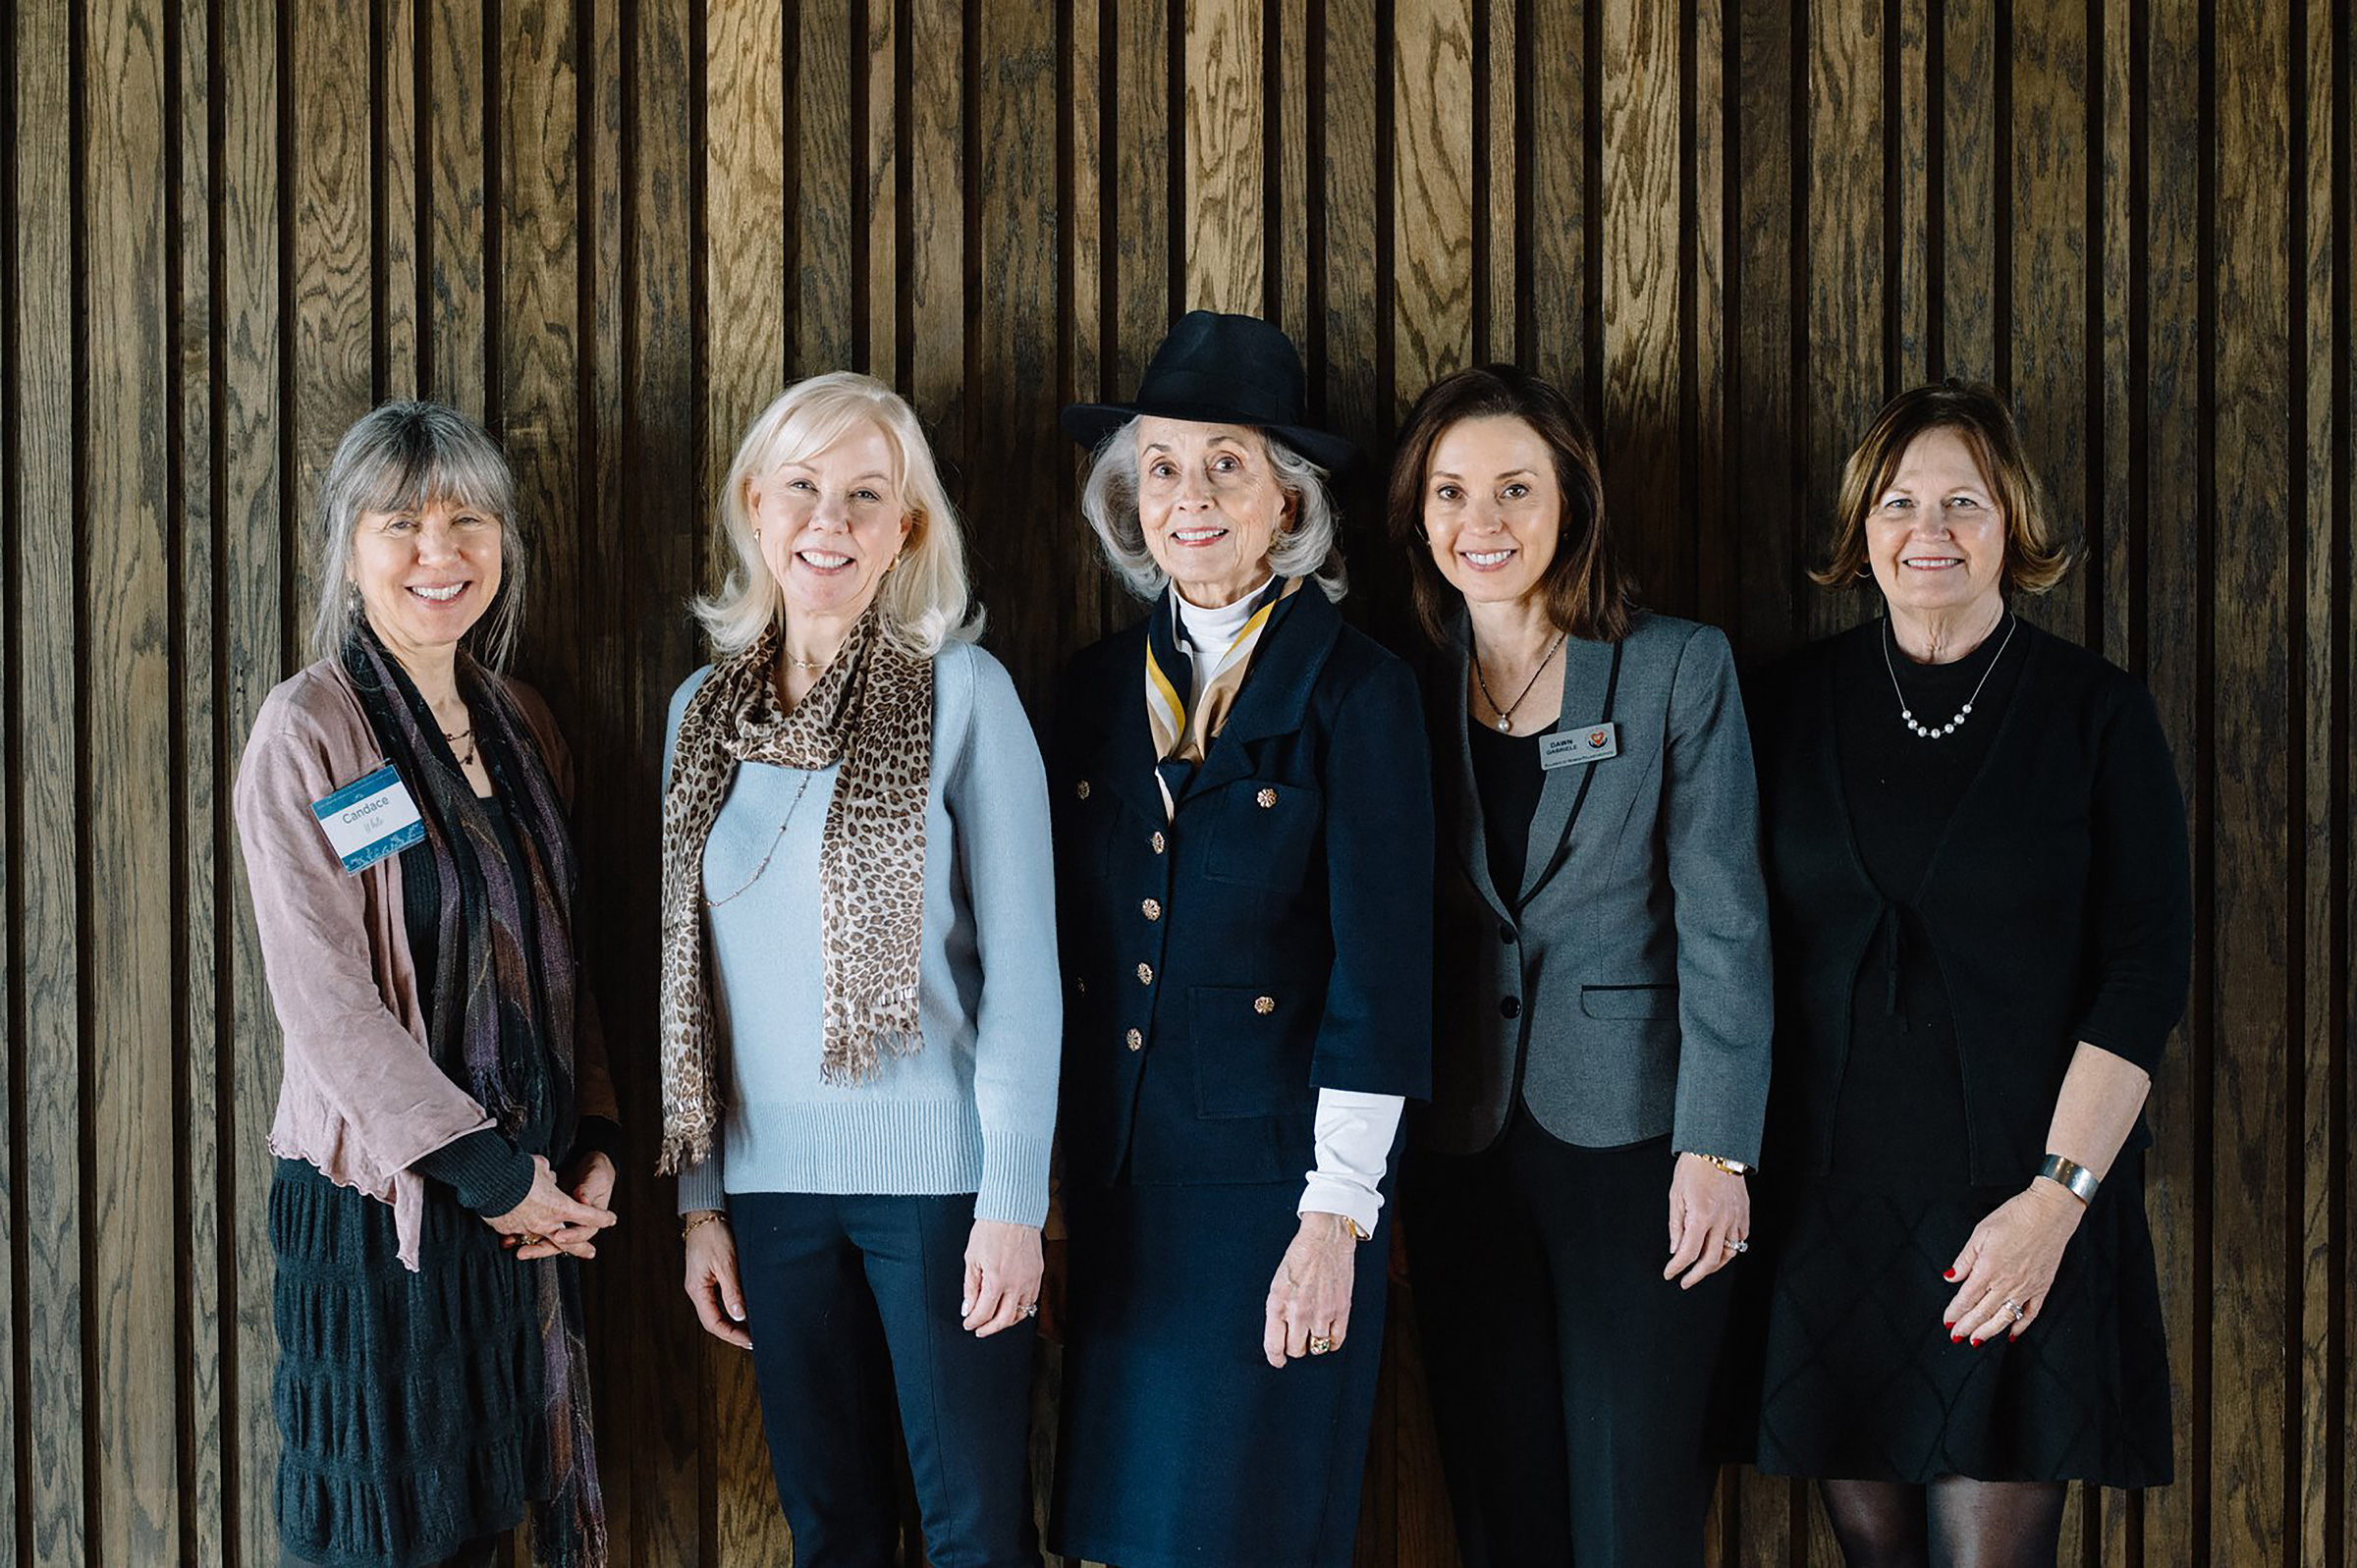 Five professionally dressed women stand together for a group photo